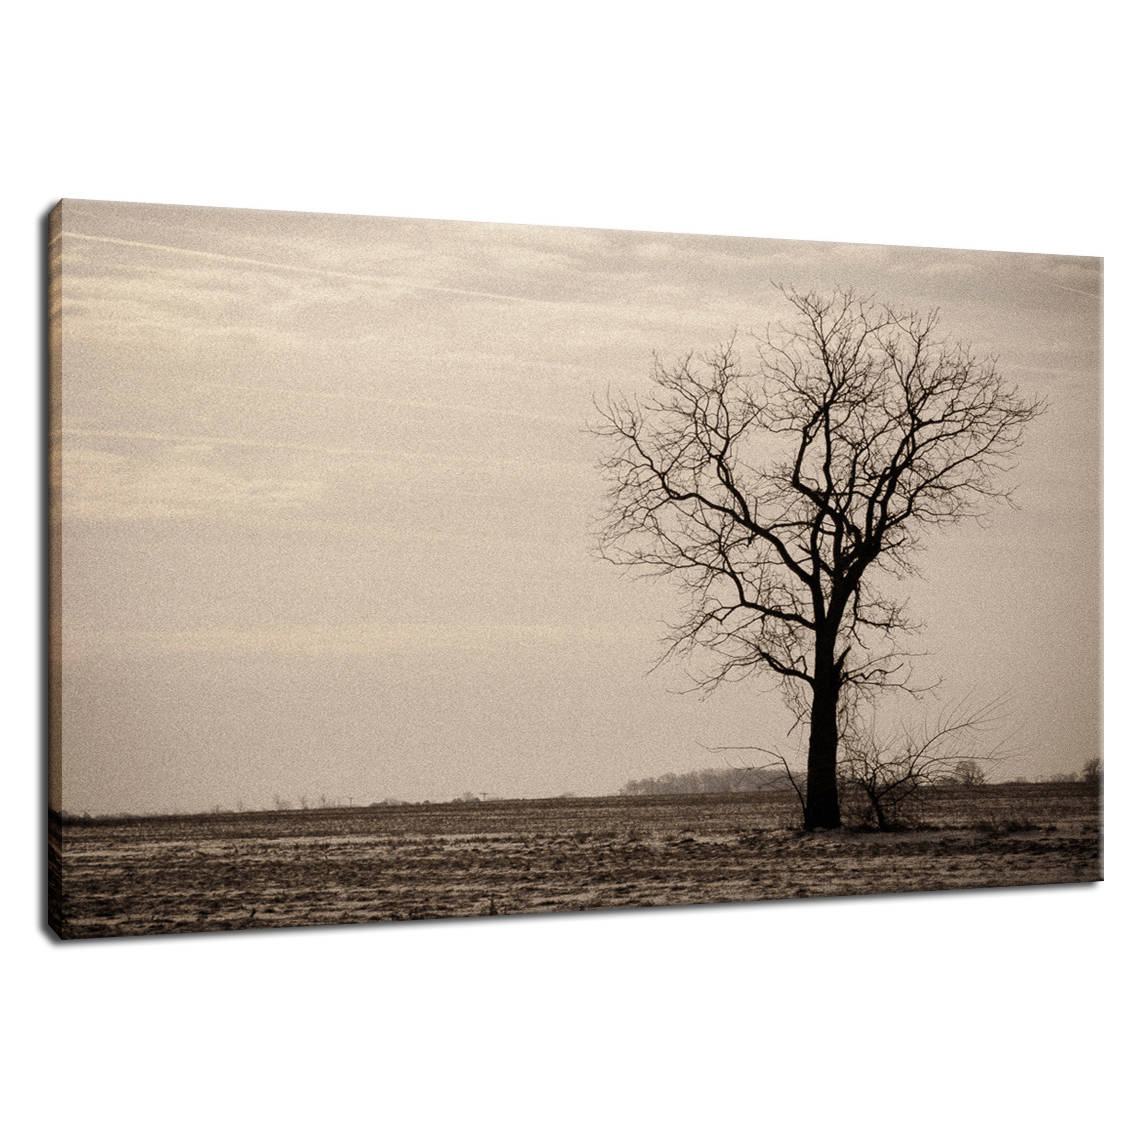 Lonely Tree in Black and White Rural Landscape Photo Fine Art Canvas Wall Art Prints  - PIPAFINEART